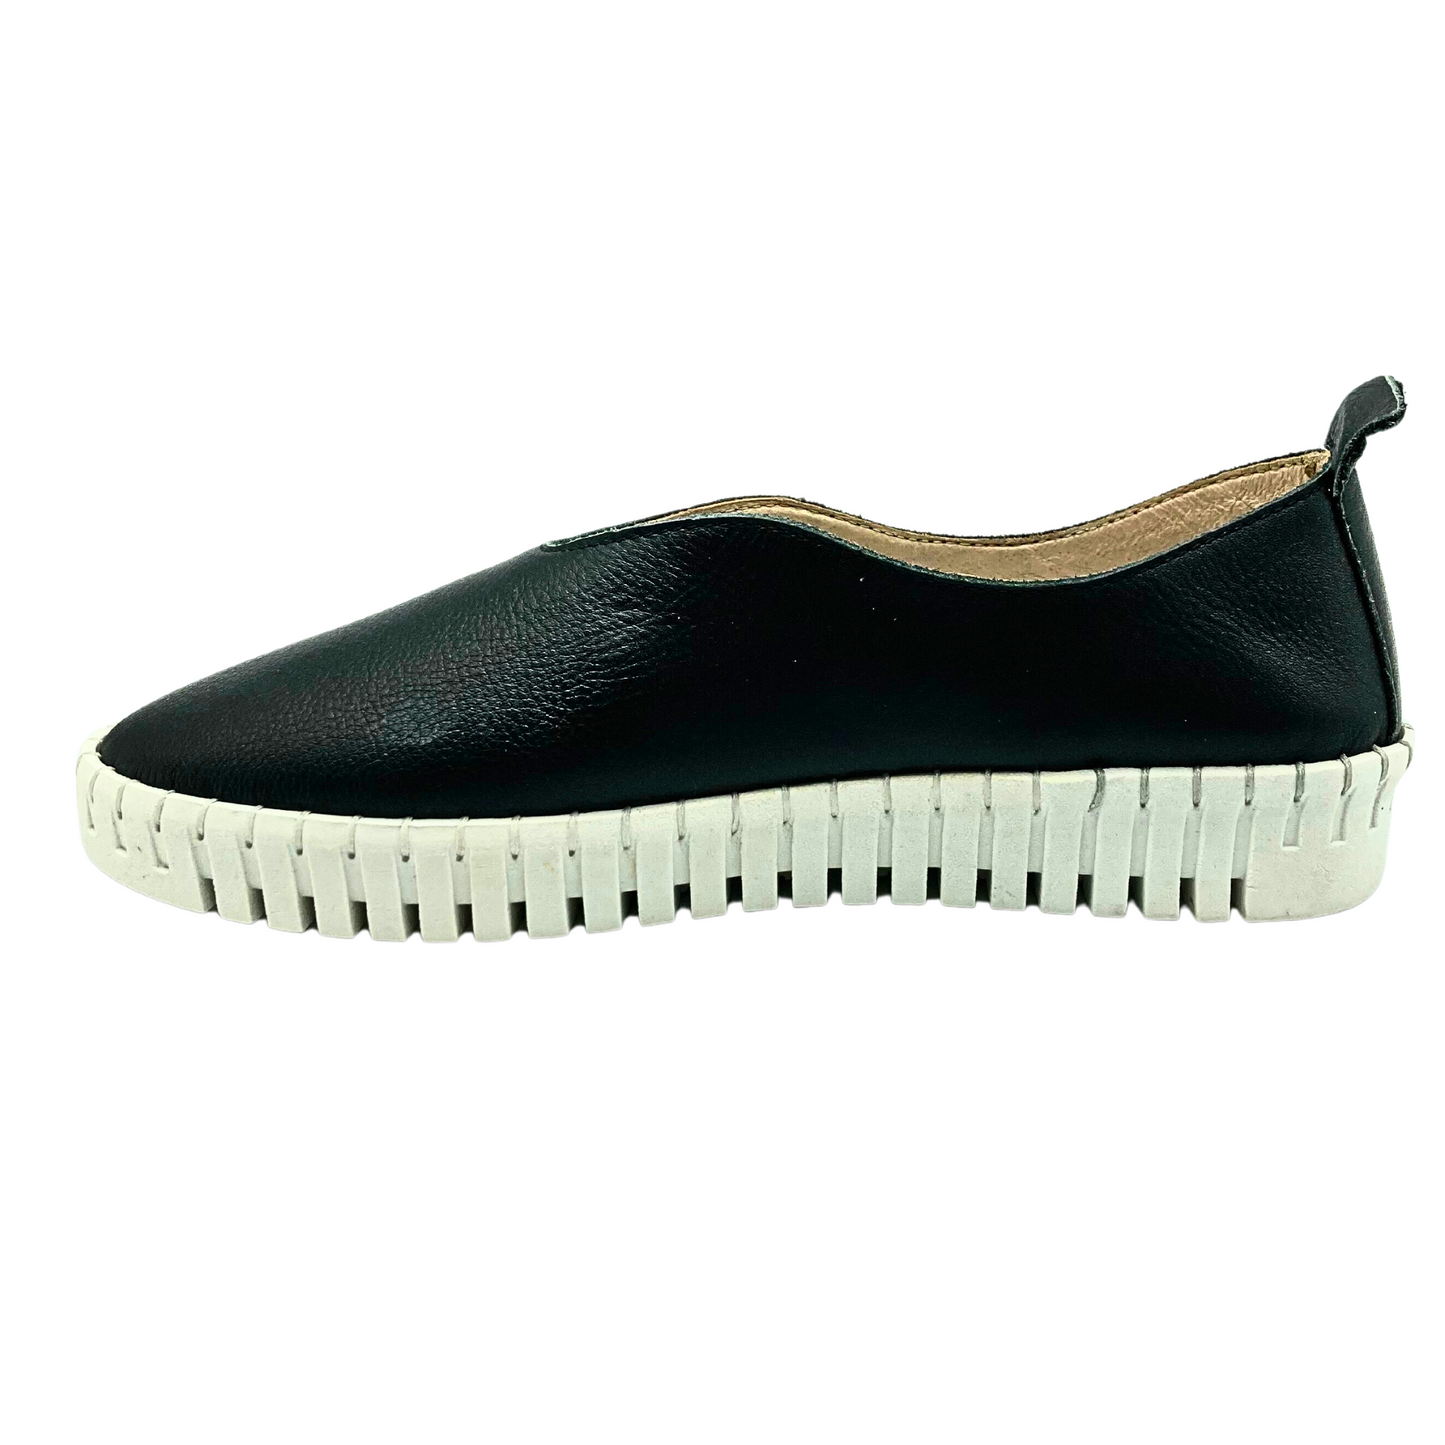 View of inside of simple, black leather slip on sneaker style shoe